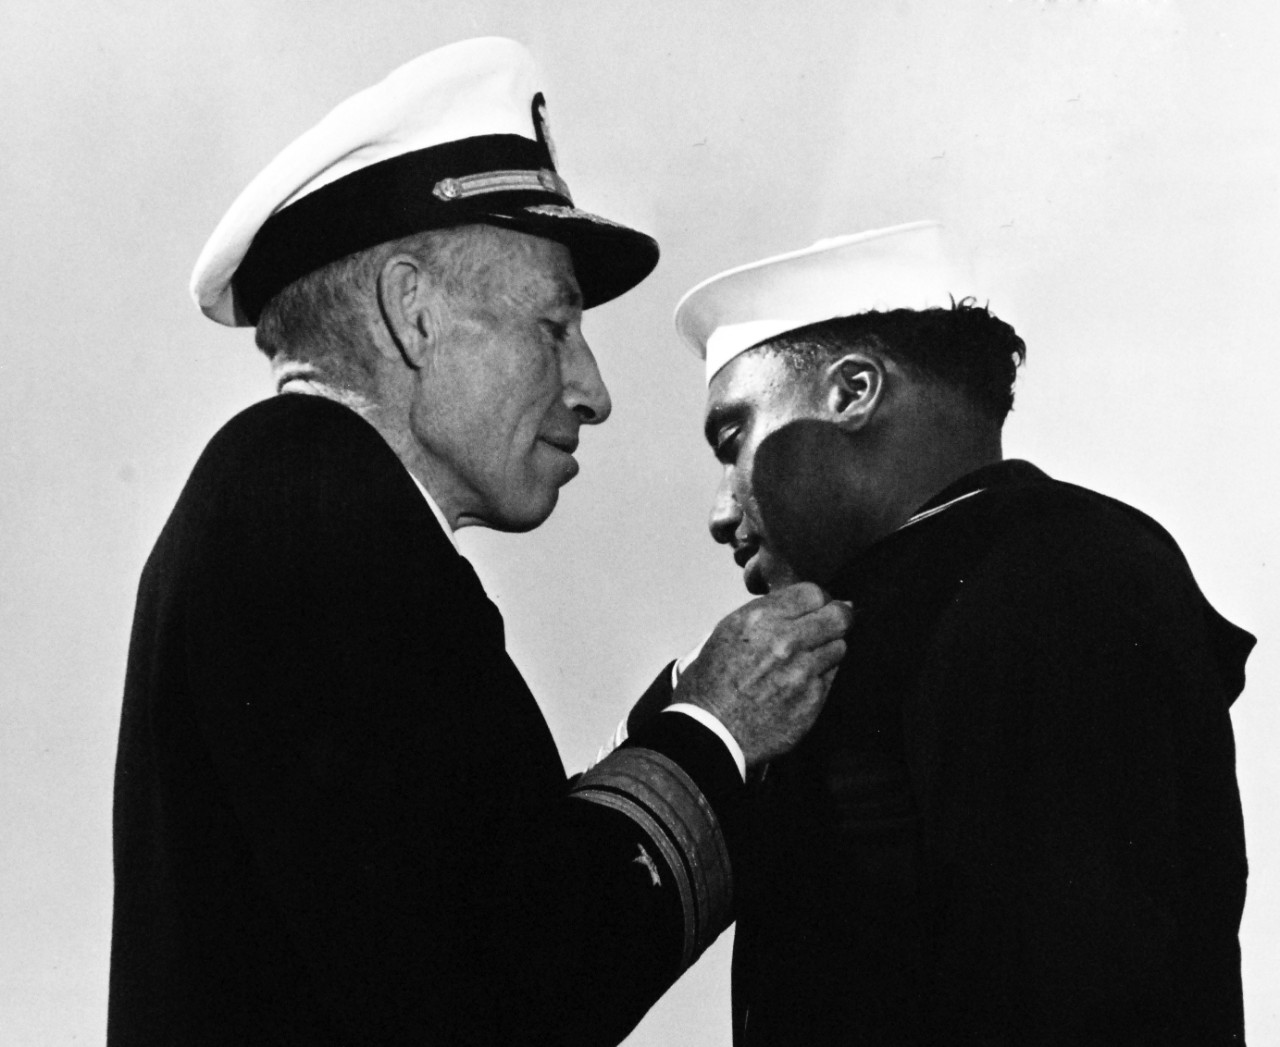 80-G-47283: Seaman First Class Richard L. McTere, USNR, 1944.   Rear Admiral Carleton H. Wright presenting the Navy and Marine Corps Medal to Seaman First Class Richard L. McTere, USNR.  Received the medal for risking his life to bring flames under control during the Port Chicago Magazine, California, explosion and fire.   Photograph filed December 9, 1944. Official U.S. Navy photograph, now in the collections of the National Archives.   